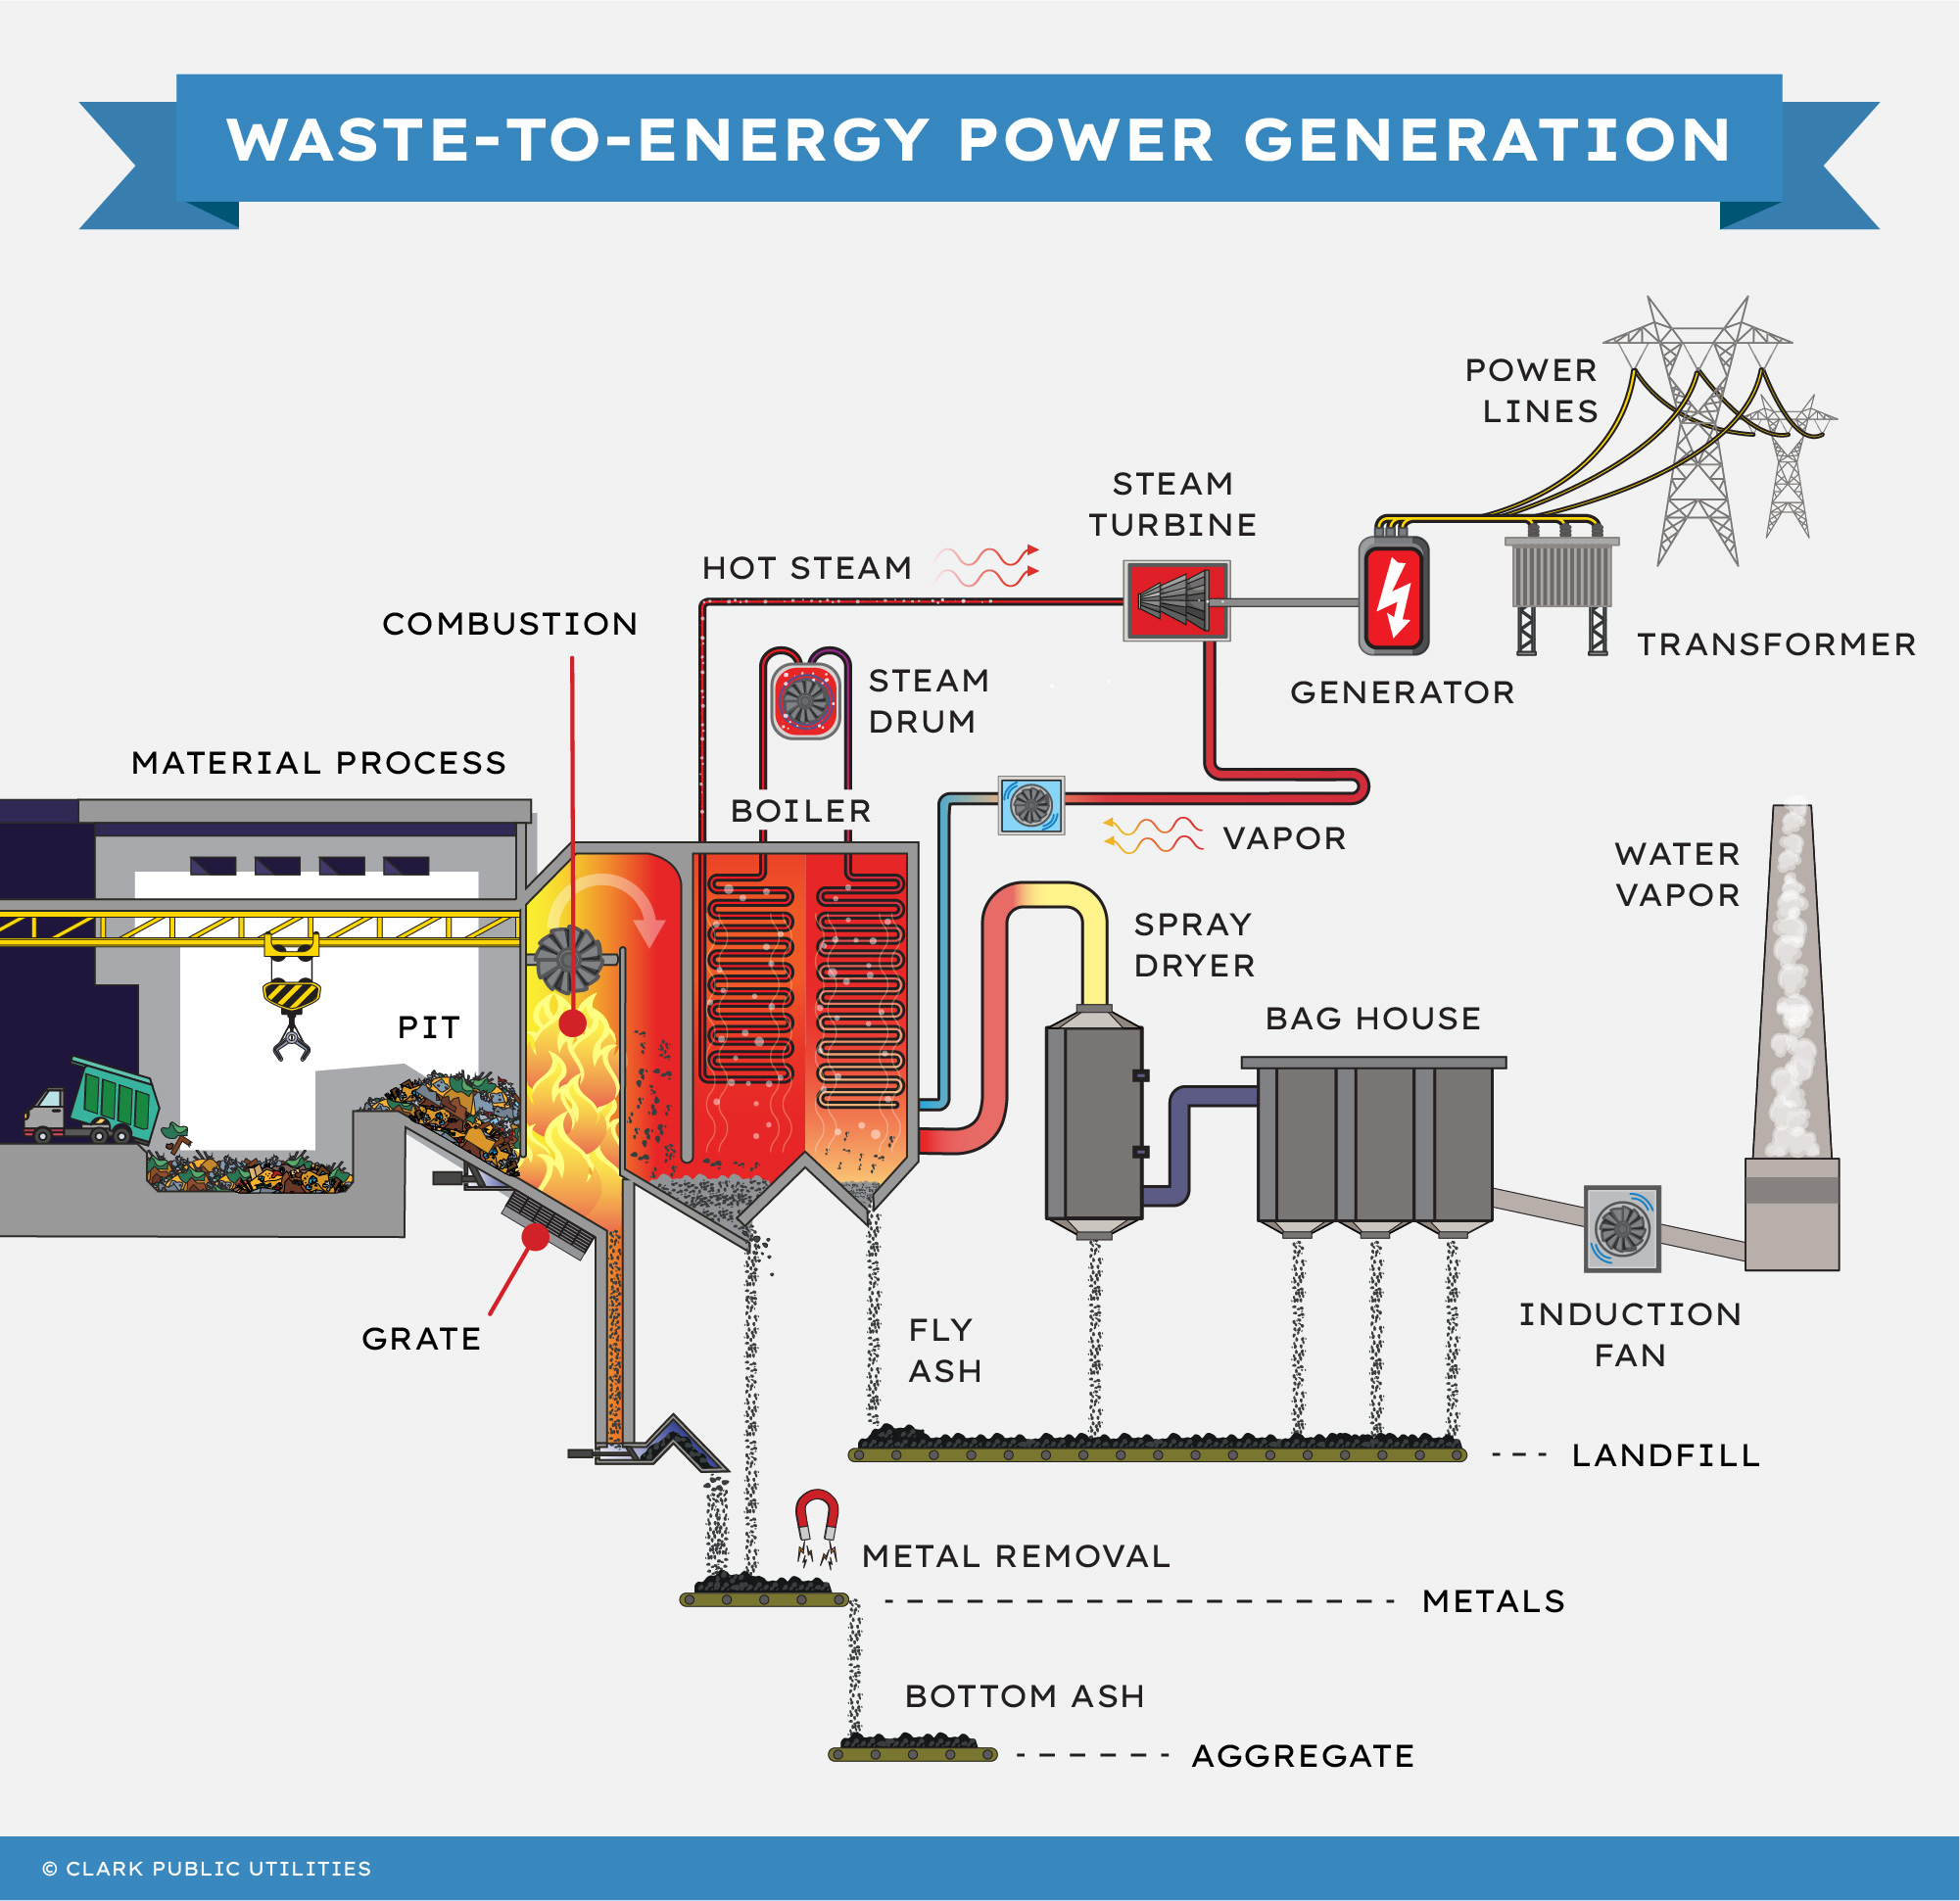 how biomass energy works